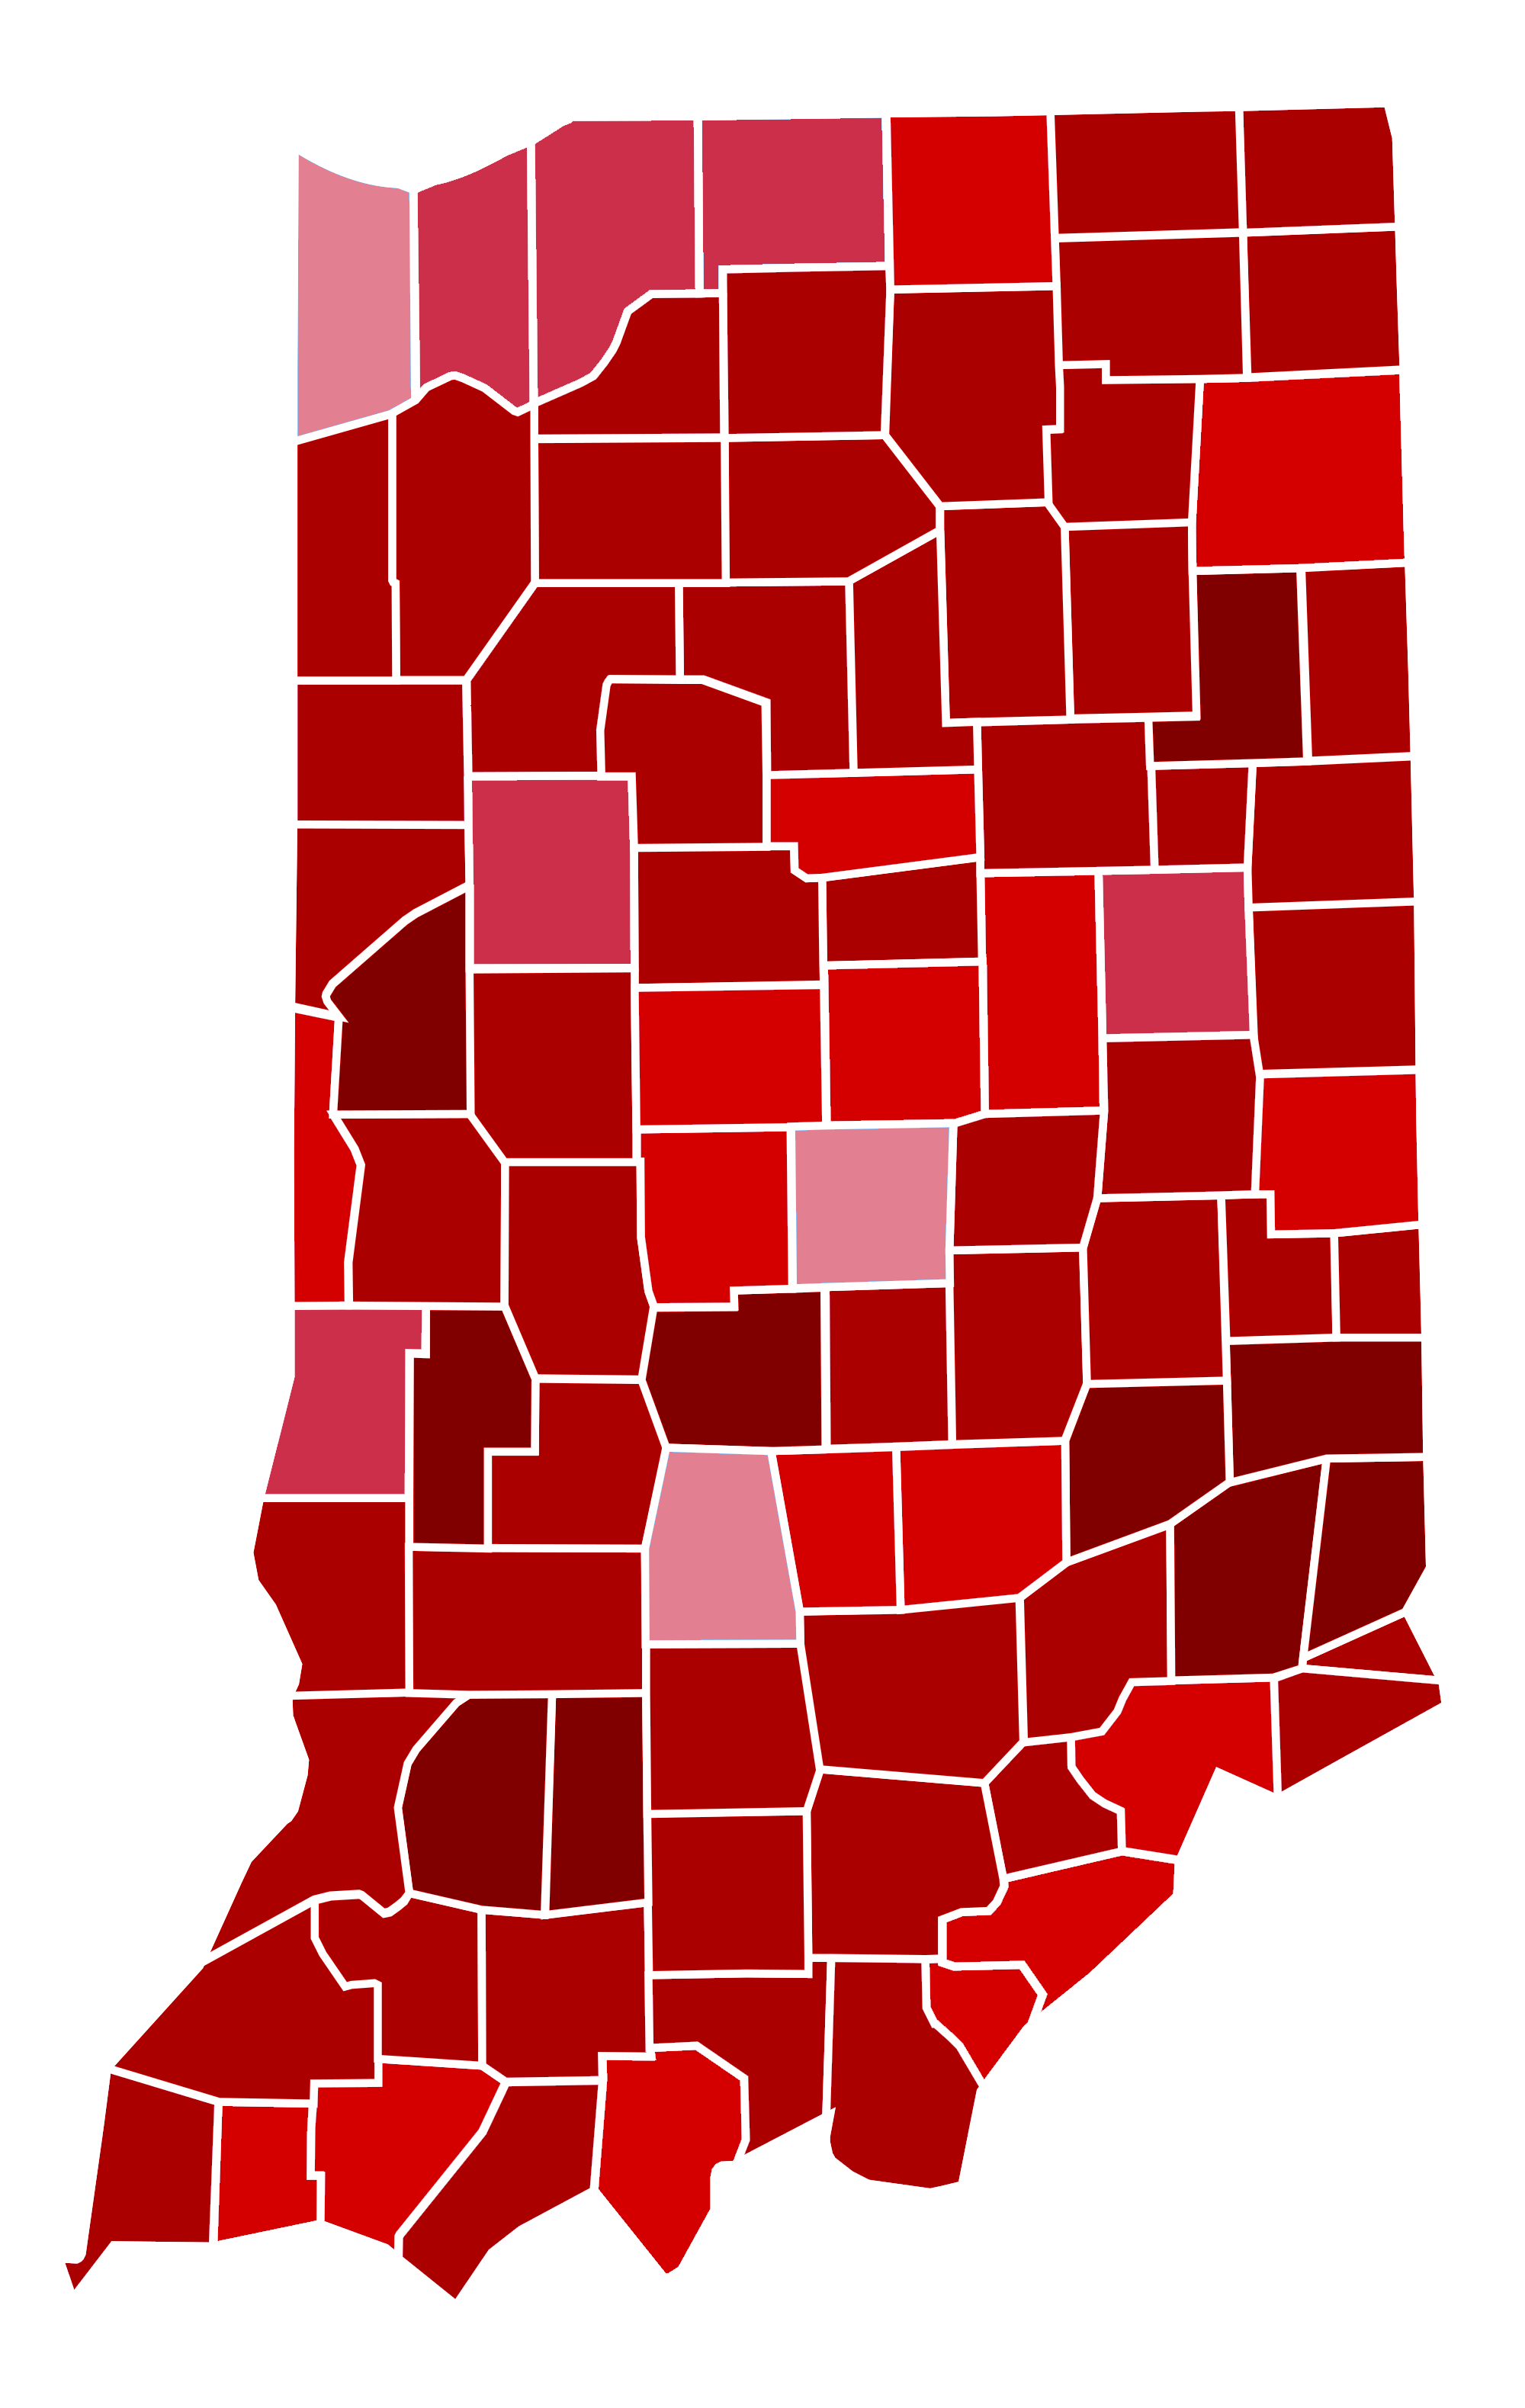 2000px-Indiana_Presidential_Election_Results_2016_Republican_Landslide_15.06%.png